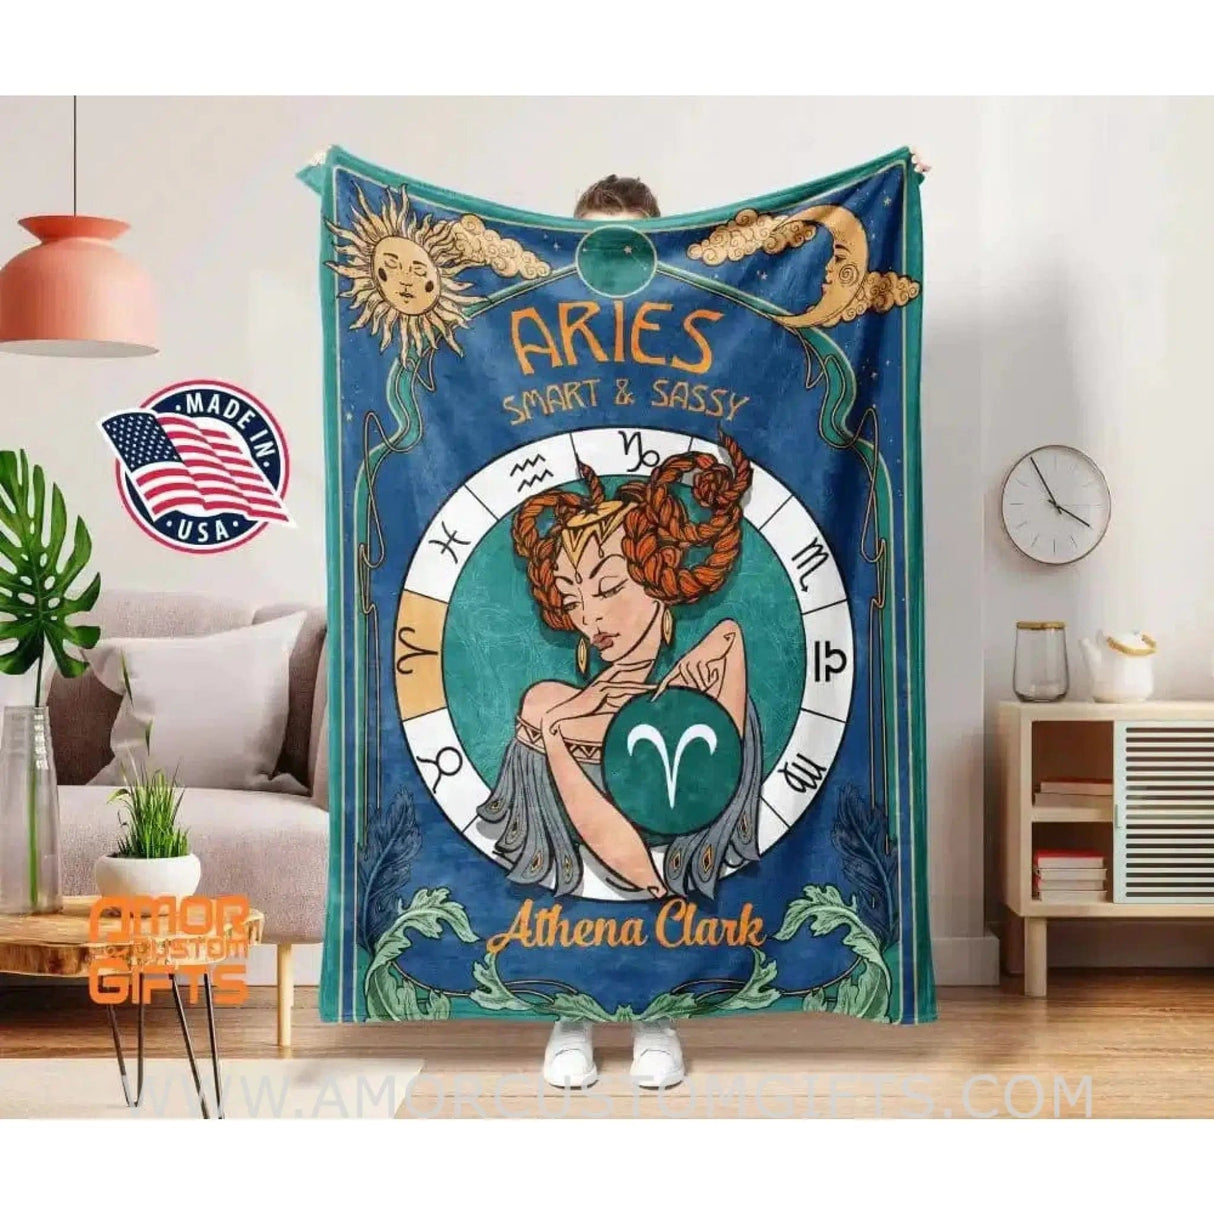 Blankets Personalized Zodiac Sherpa Blanket - Choose Your Sign Custom Name Horoscope Astrology Blanket - Constellation Star Decor and Gifts